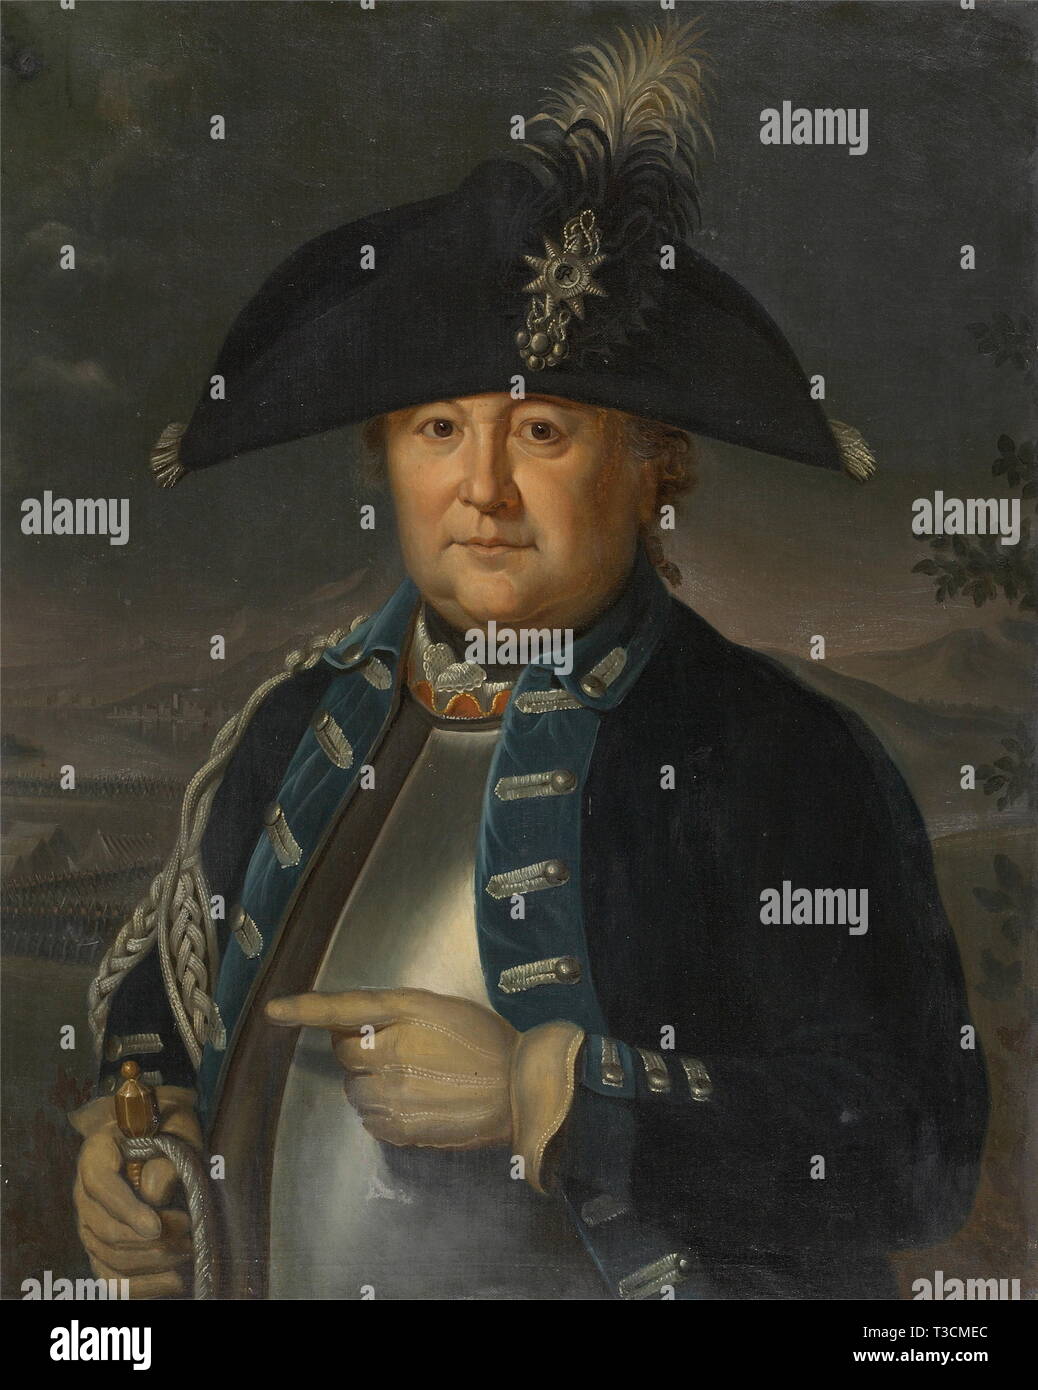 Colonel Johann Rudolf von Müller Amsoldingen, a portrait, end of the 18th century Oil on canvas, inscribed on the reverse s people, 18th century, Prussian, Prussia, German, Germany, militaria, military, object, objects, stills, clipping, clippings, cut out, cut-out, cut-outs, man, men, male, Additional-Rights-Clearance-Info-Not-Available Stock Photo